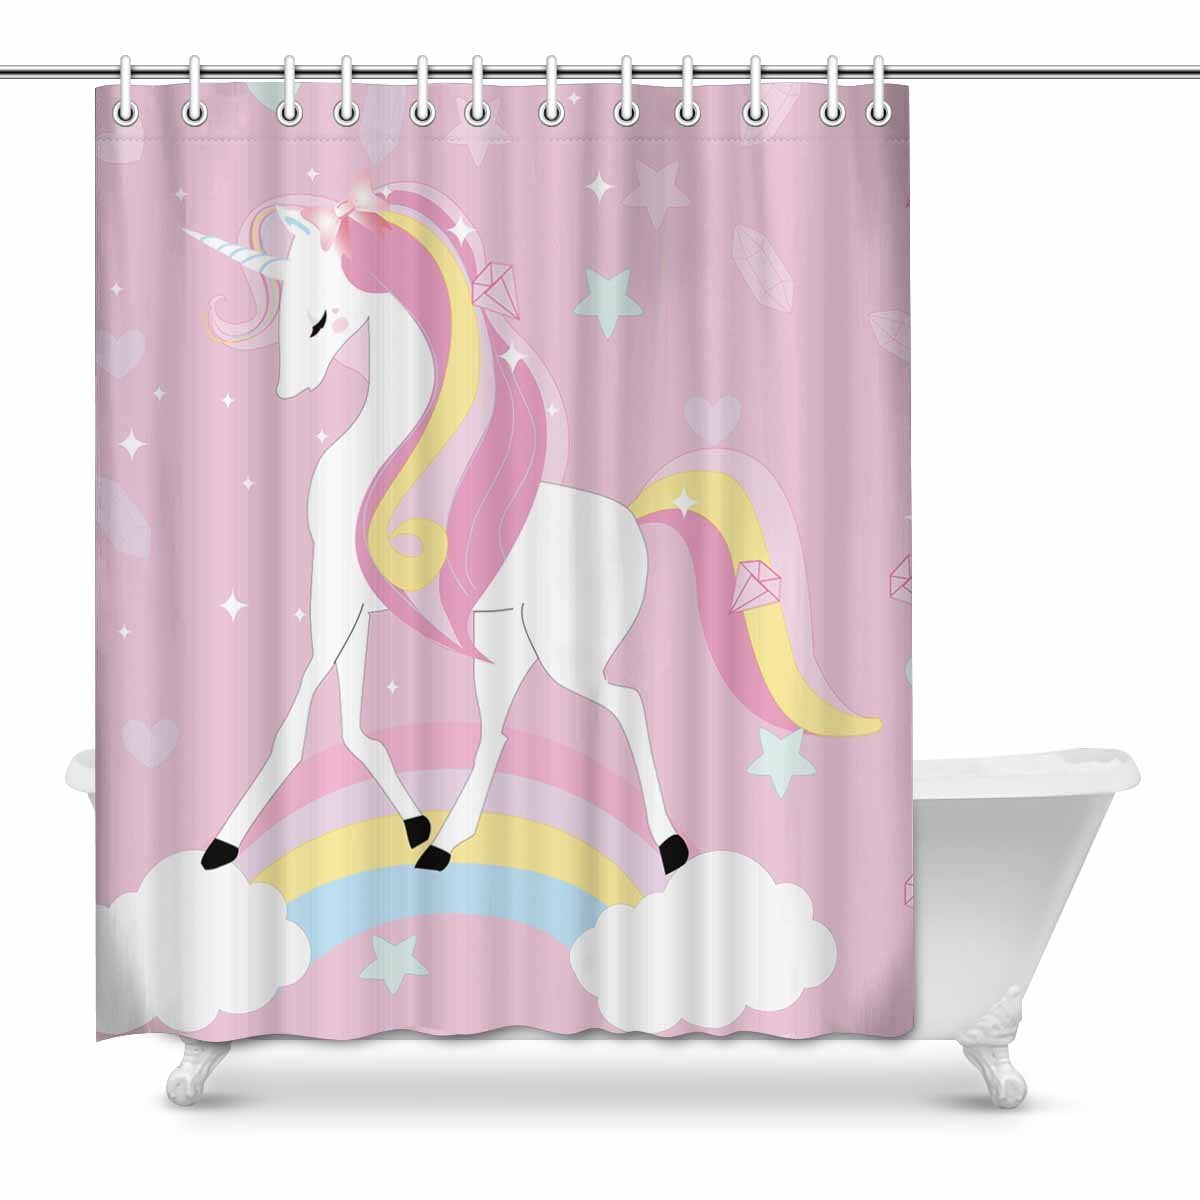 Details about   Unicorn with Sunglasses Shower Curtain Waterproof Fabric Bathroom Decor Set 71In 